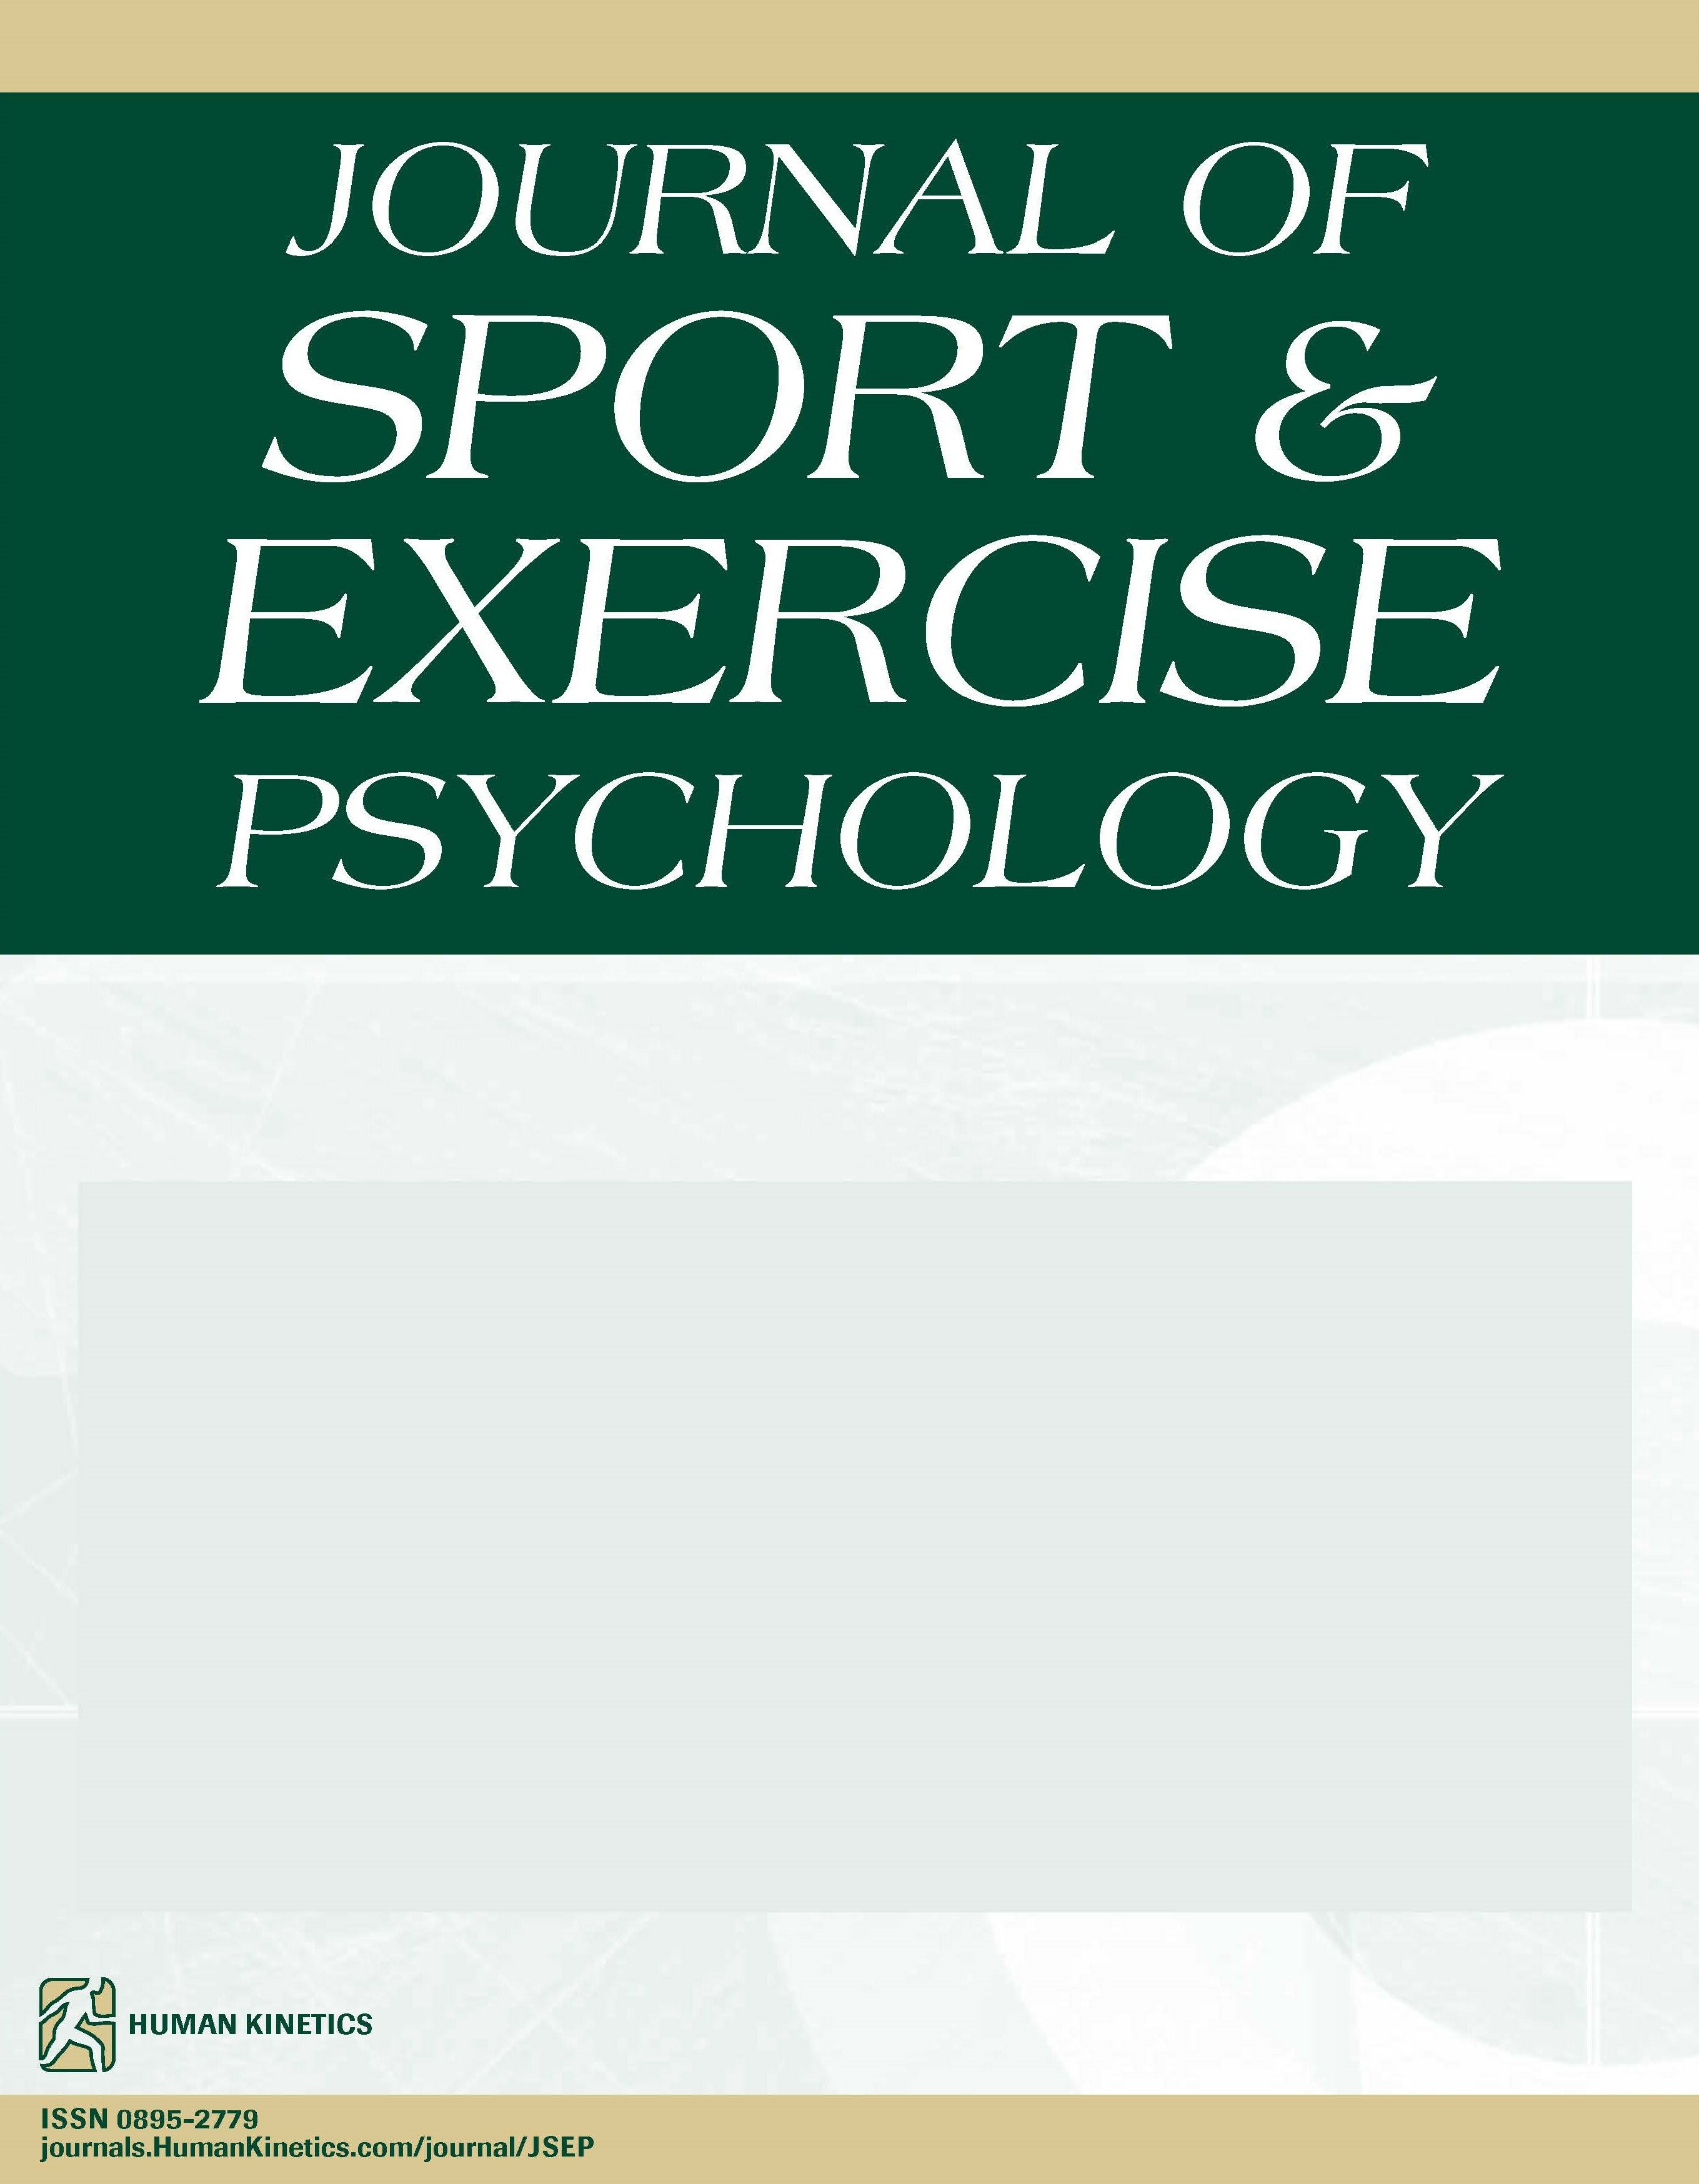 Does Participating in a Variety of Activities at a Variety of Locations or With Different People Predict Physical Activity Behavior Among Adolescents? The Mediating Role of Perceived Variety